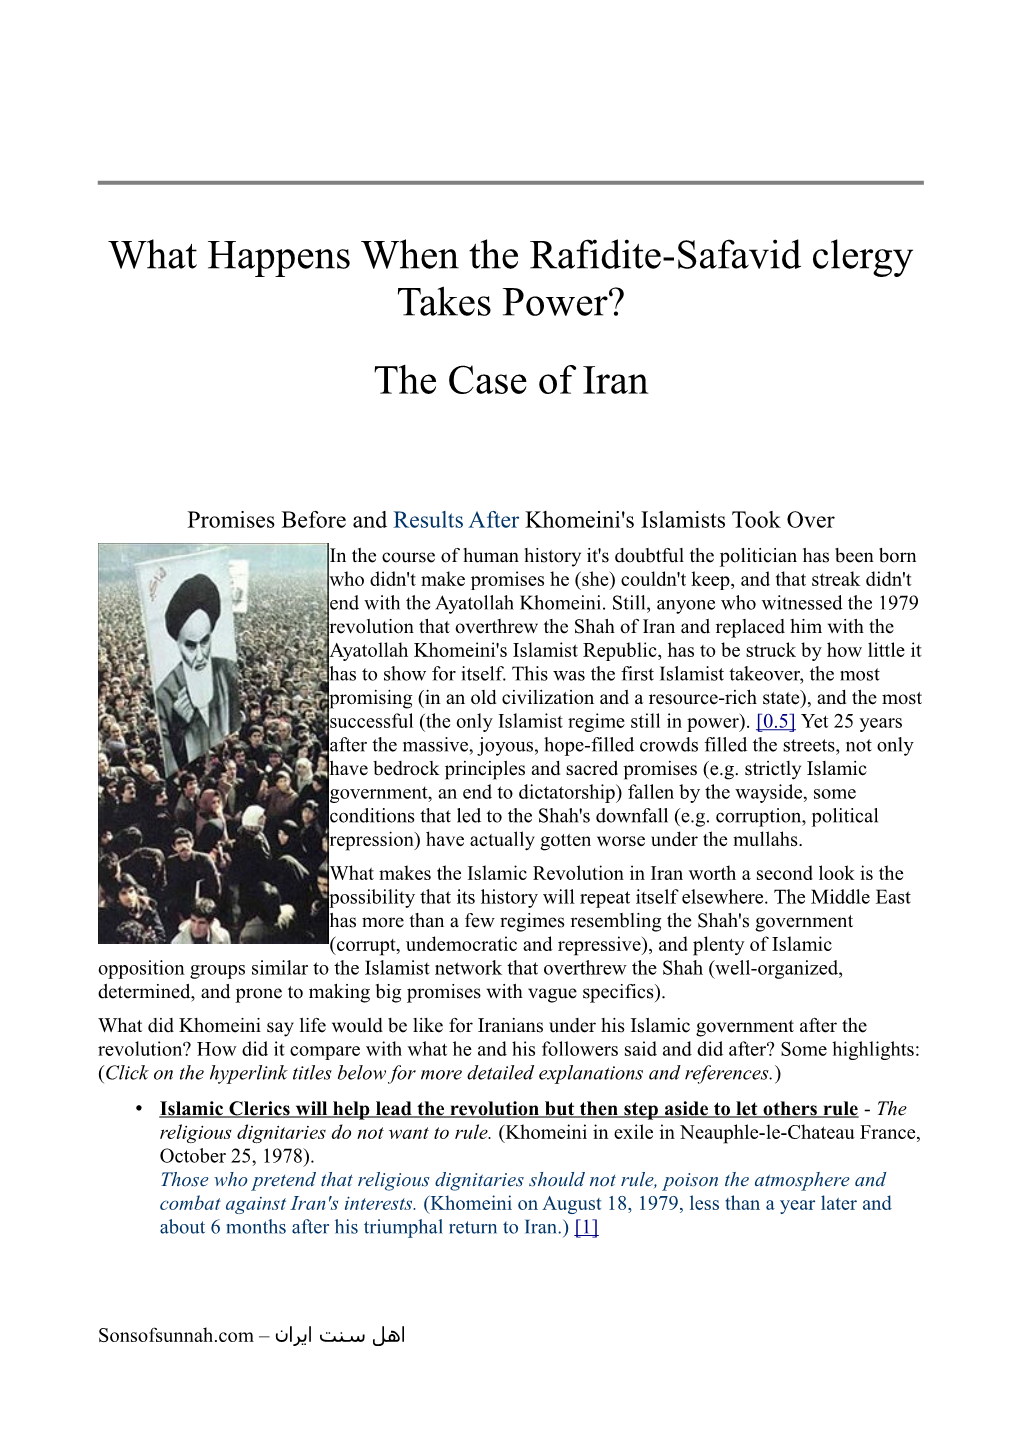 What Happens When the Rafidite-Safavid Clergy Takes Power? the Case of Iran